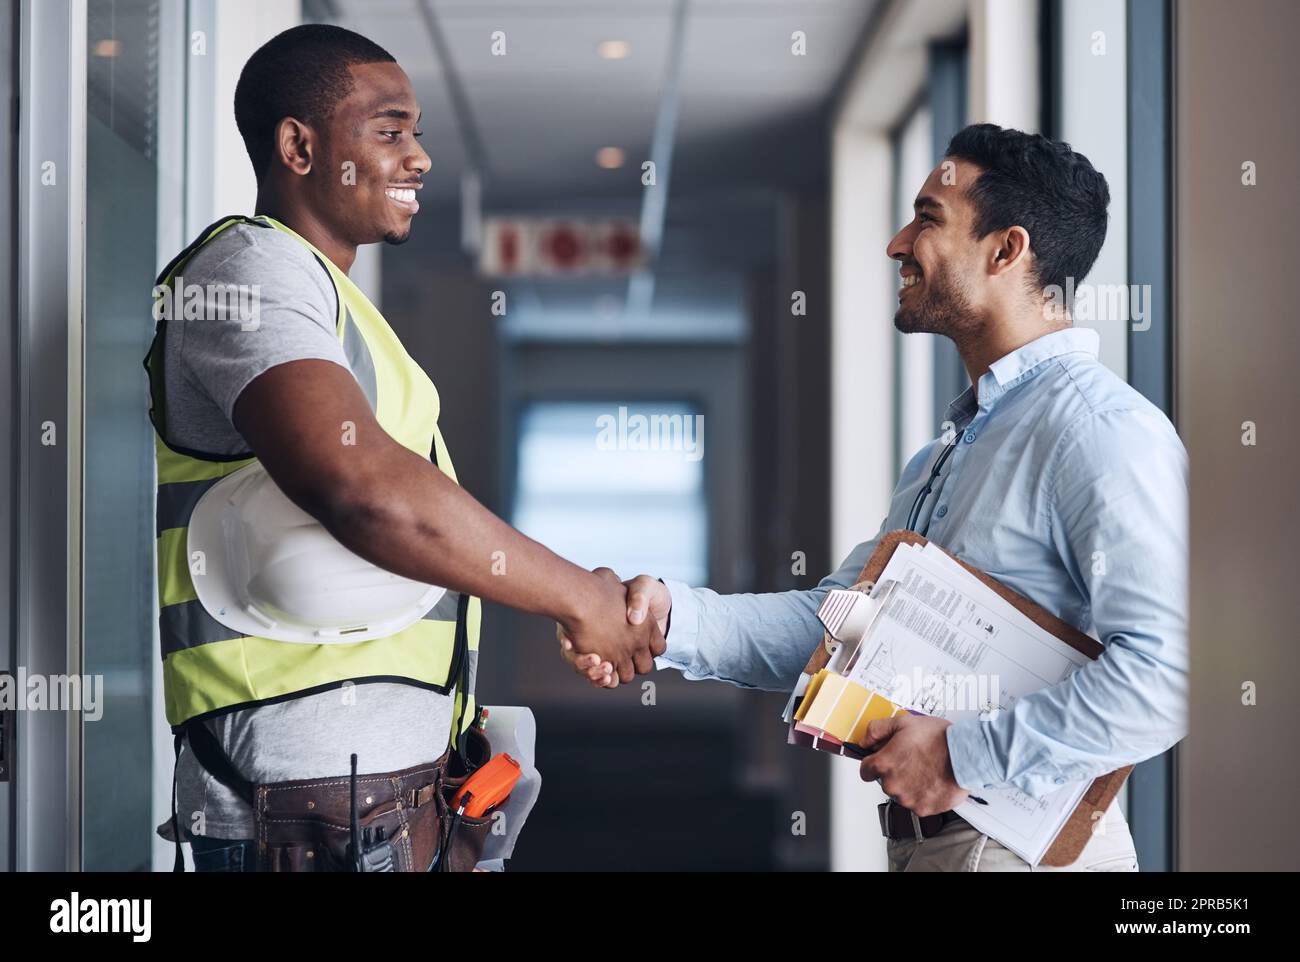 Thank you for trusting us with your renovations. two young architects standing together and shaking hands after a discussion about the room before they renovate. Stock Photo